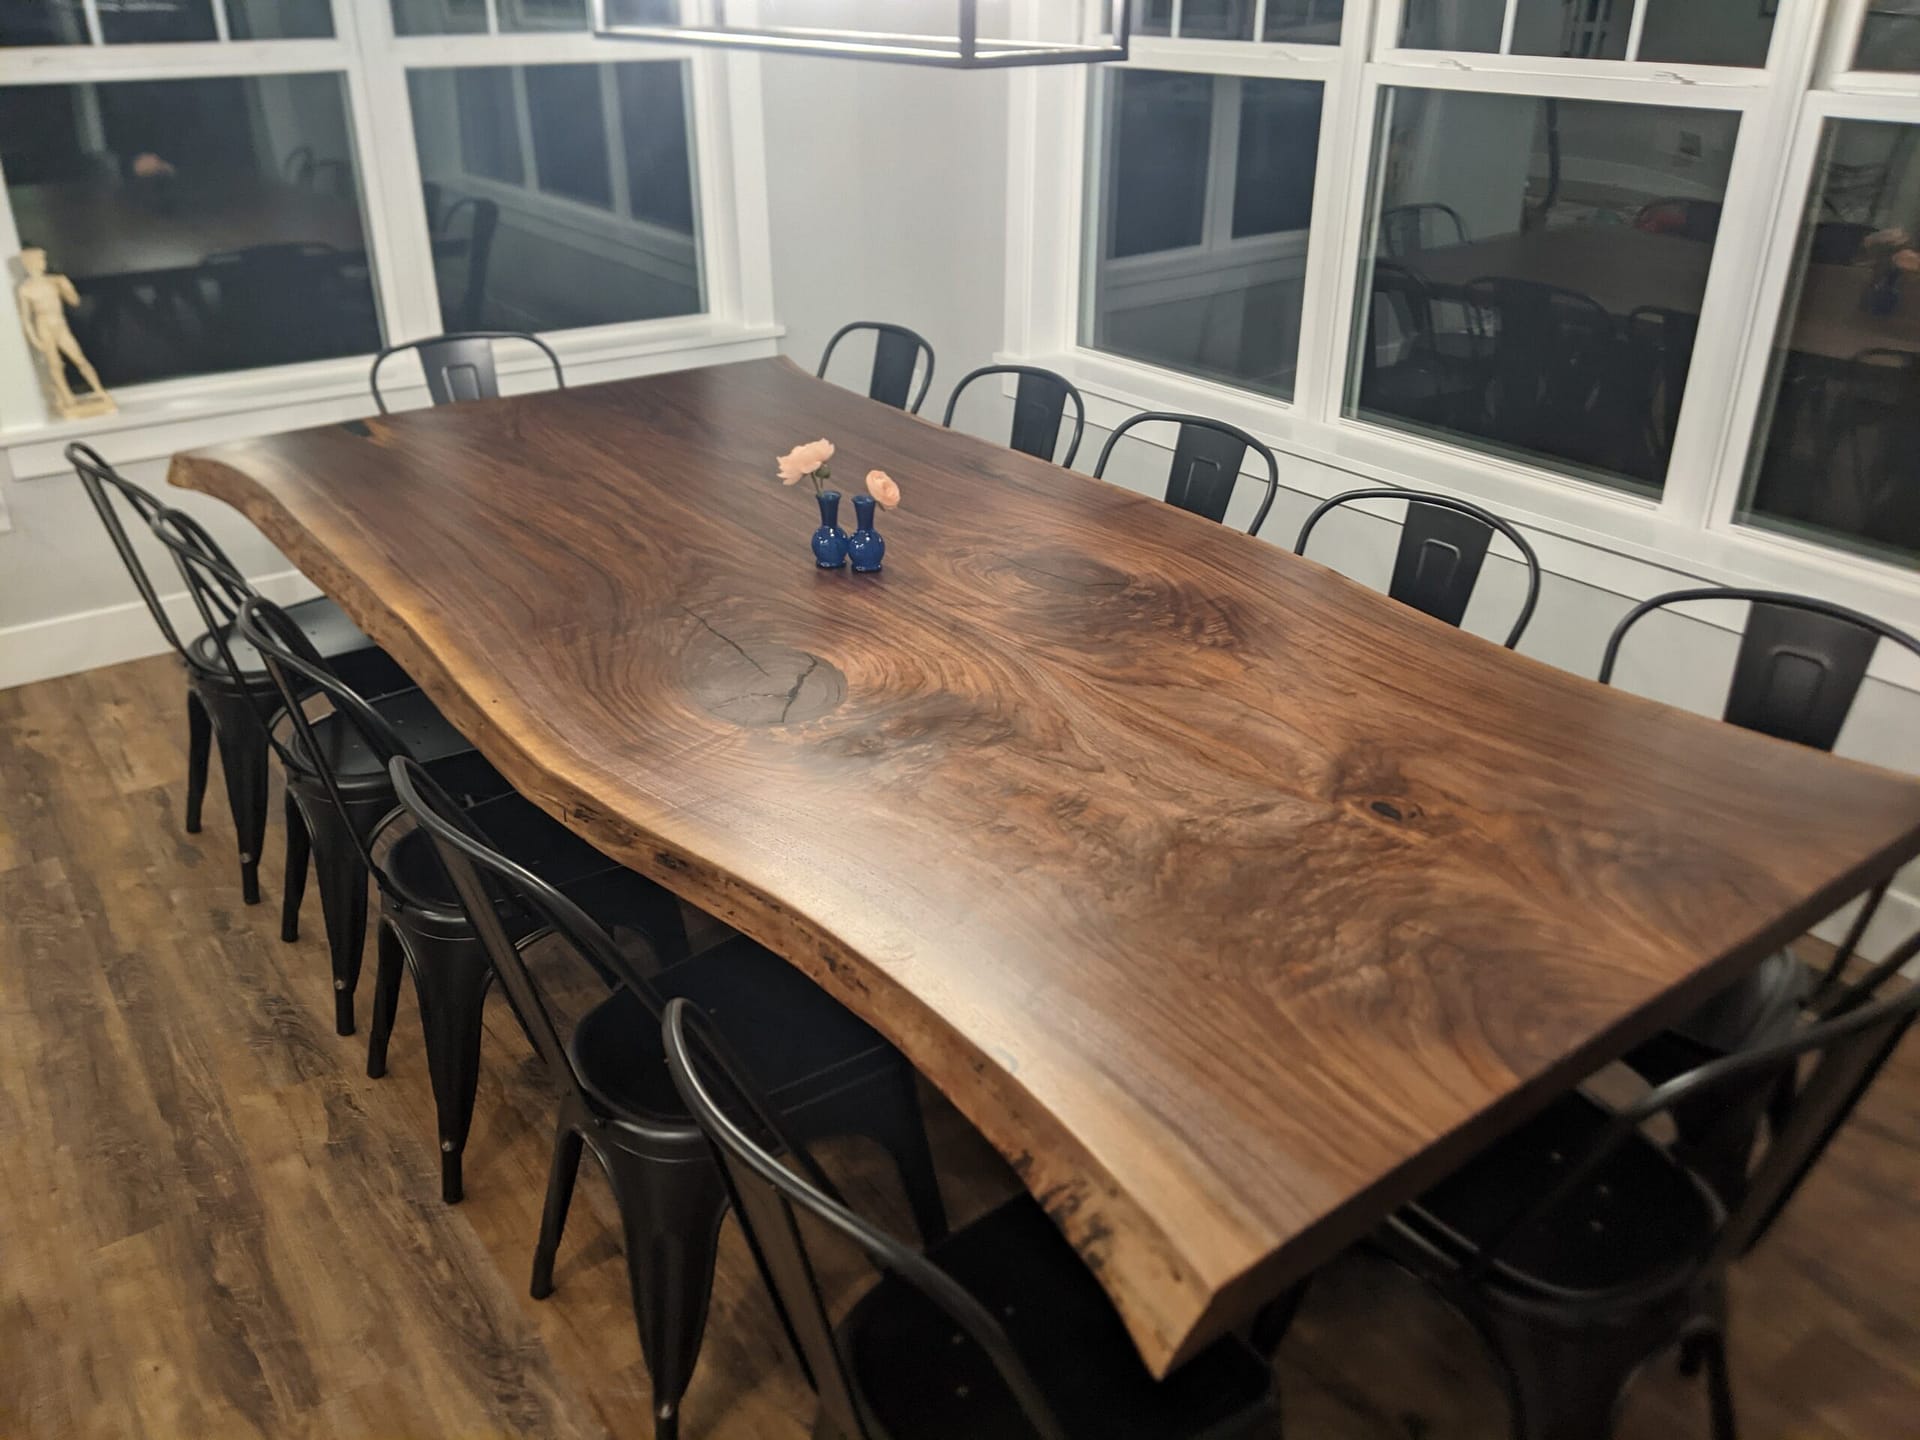 Live Edge Dining Room Tables For Sale | Lancaster Live Edge